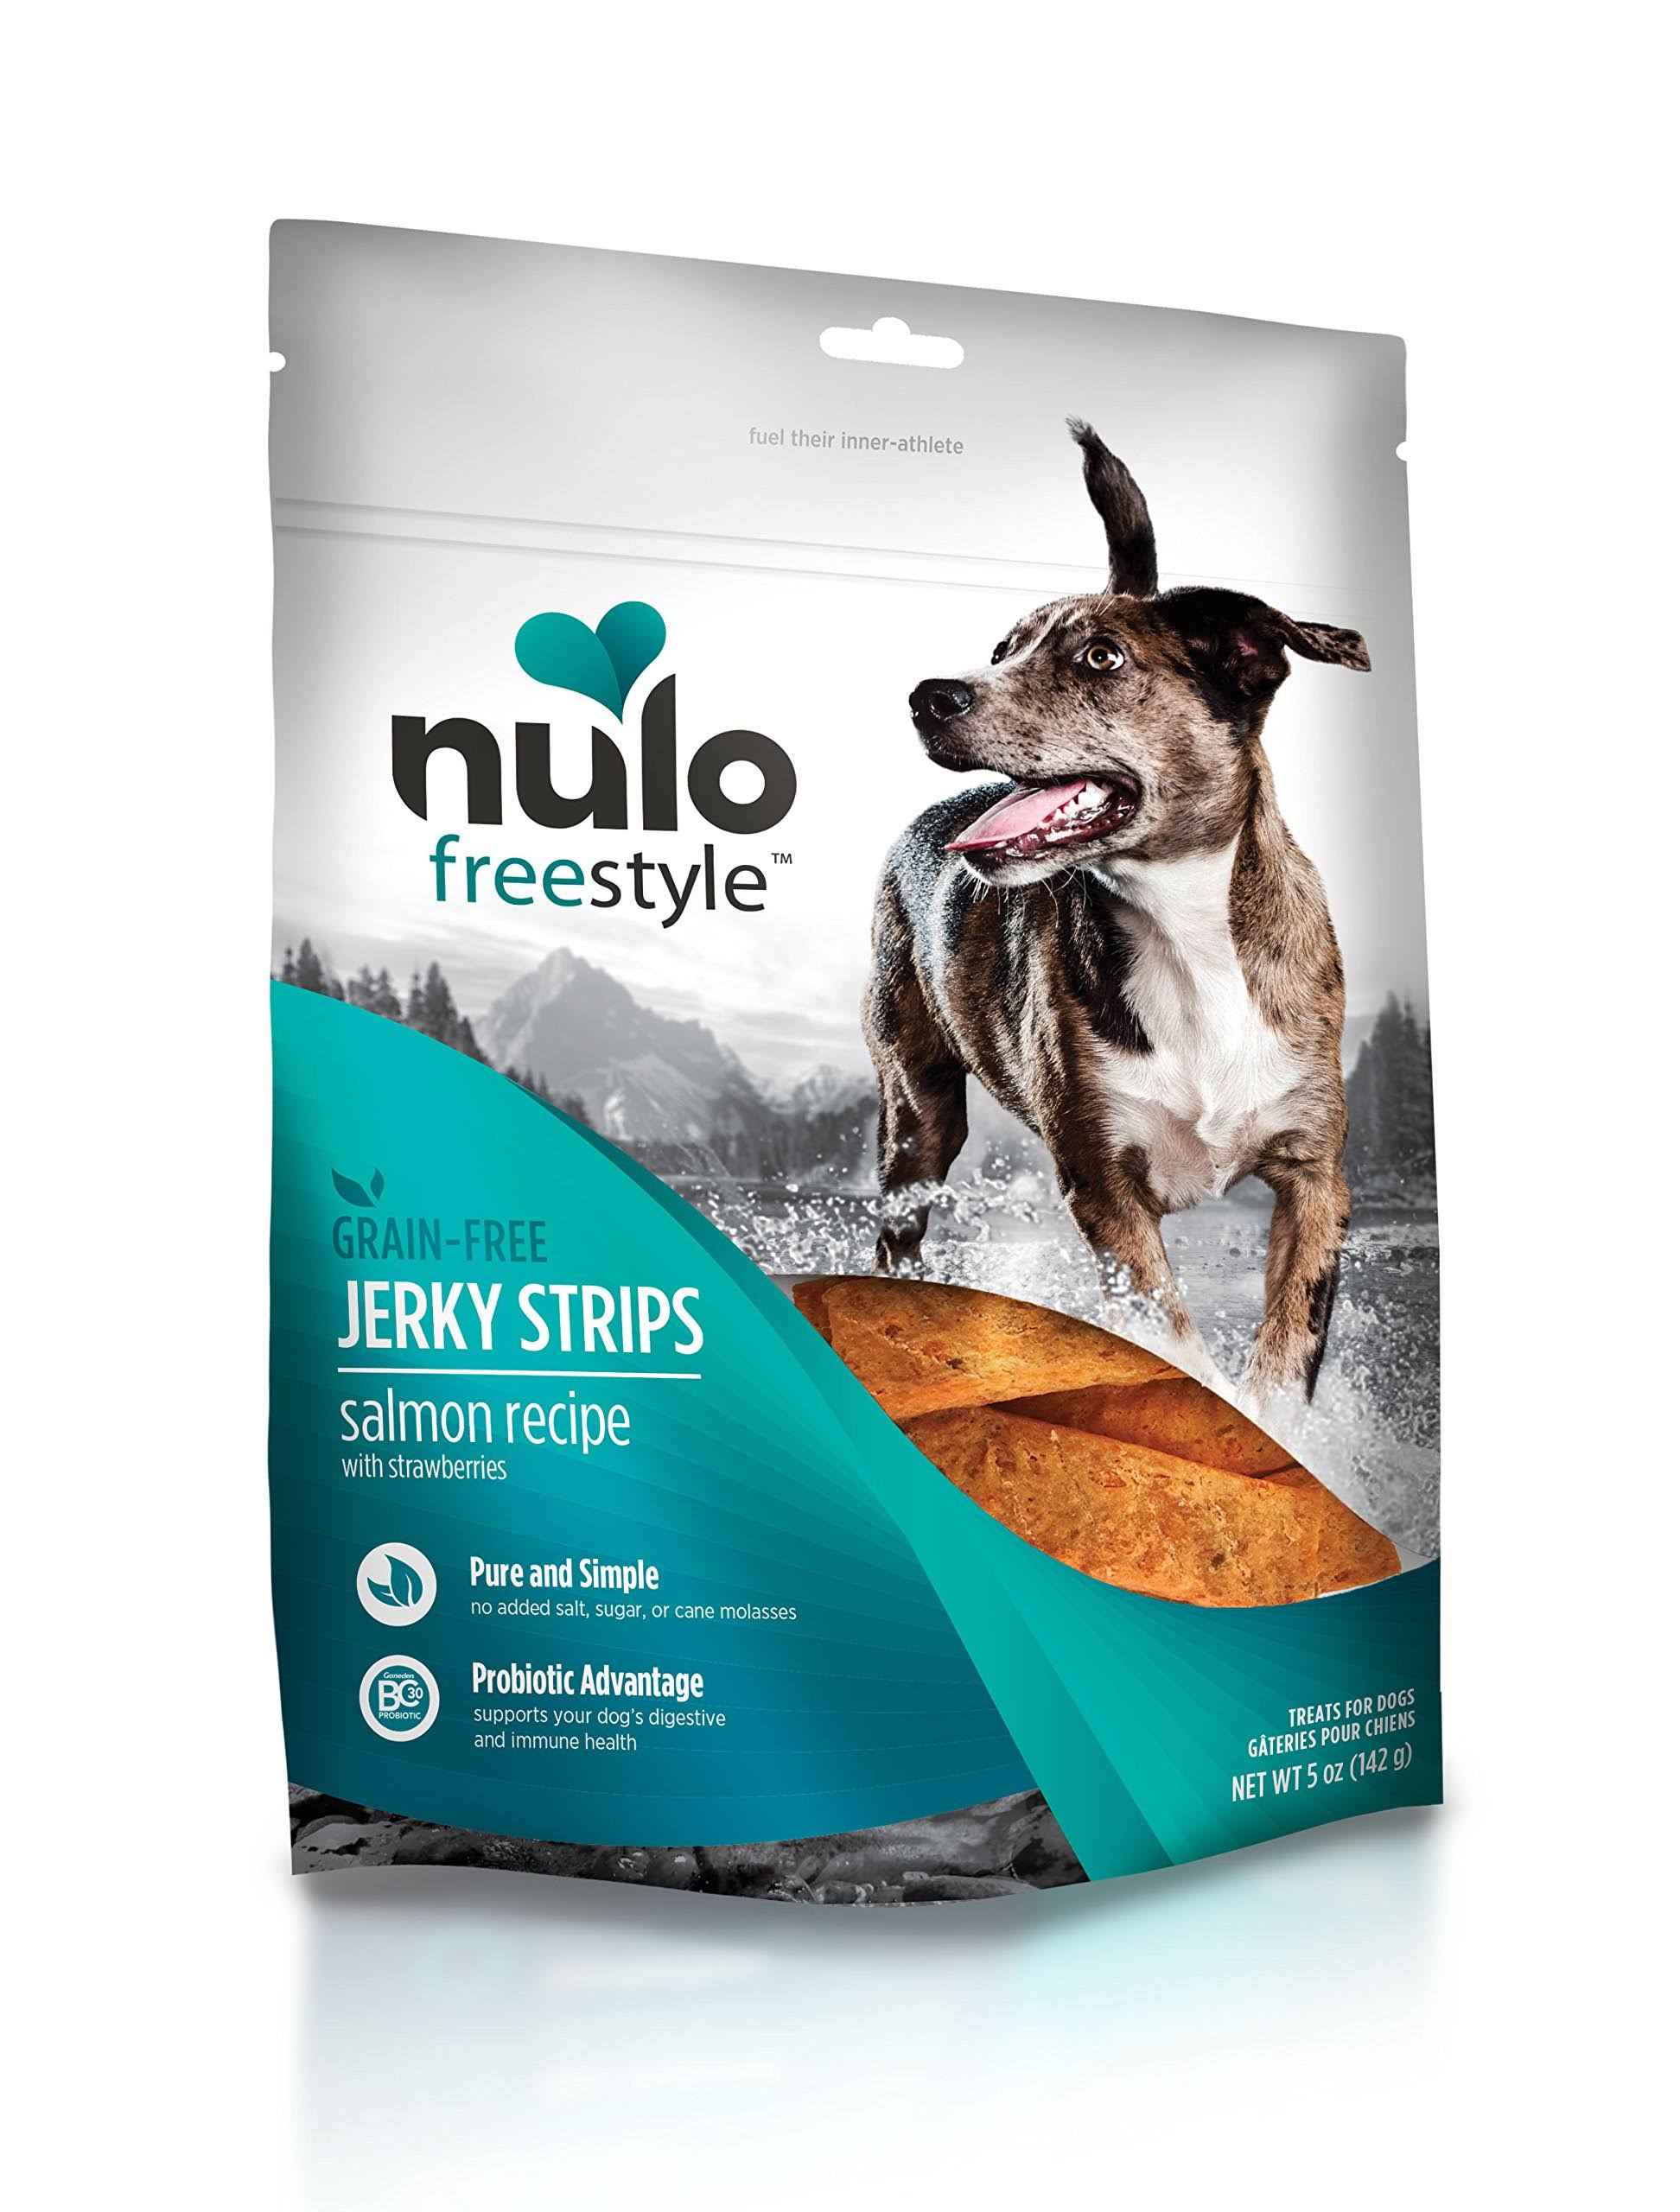 Nulo Freestyle Jerky Dog Treats: Healthy Grain Free Dog Treat - Natural Dog Treats For Training or Reward - Real Meat Jerky Strips For Puppy and Adult